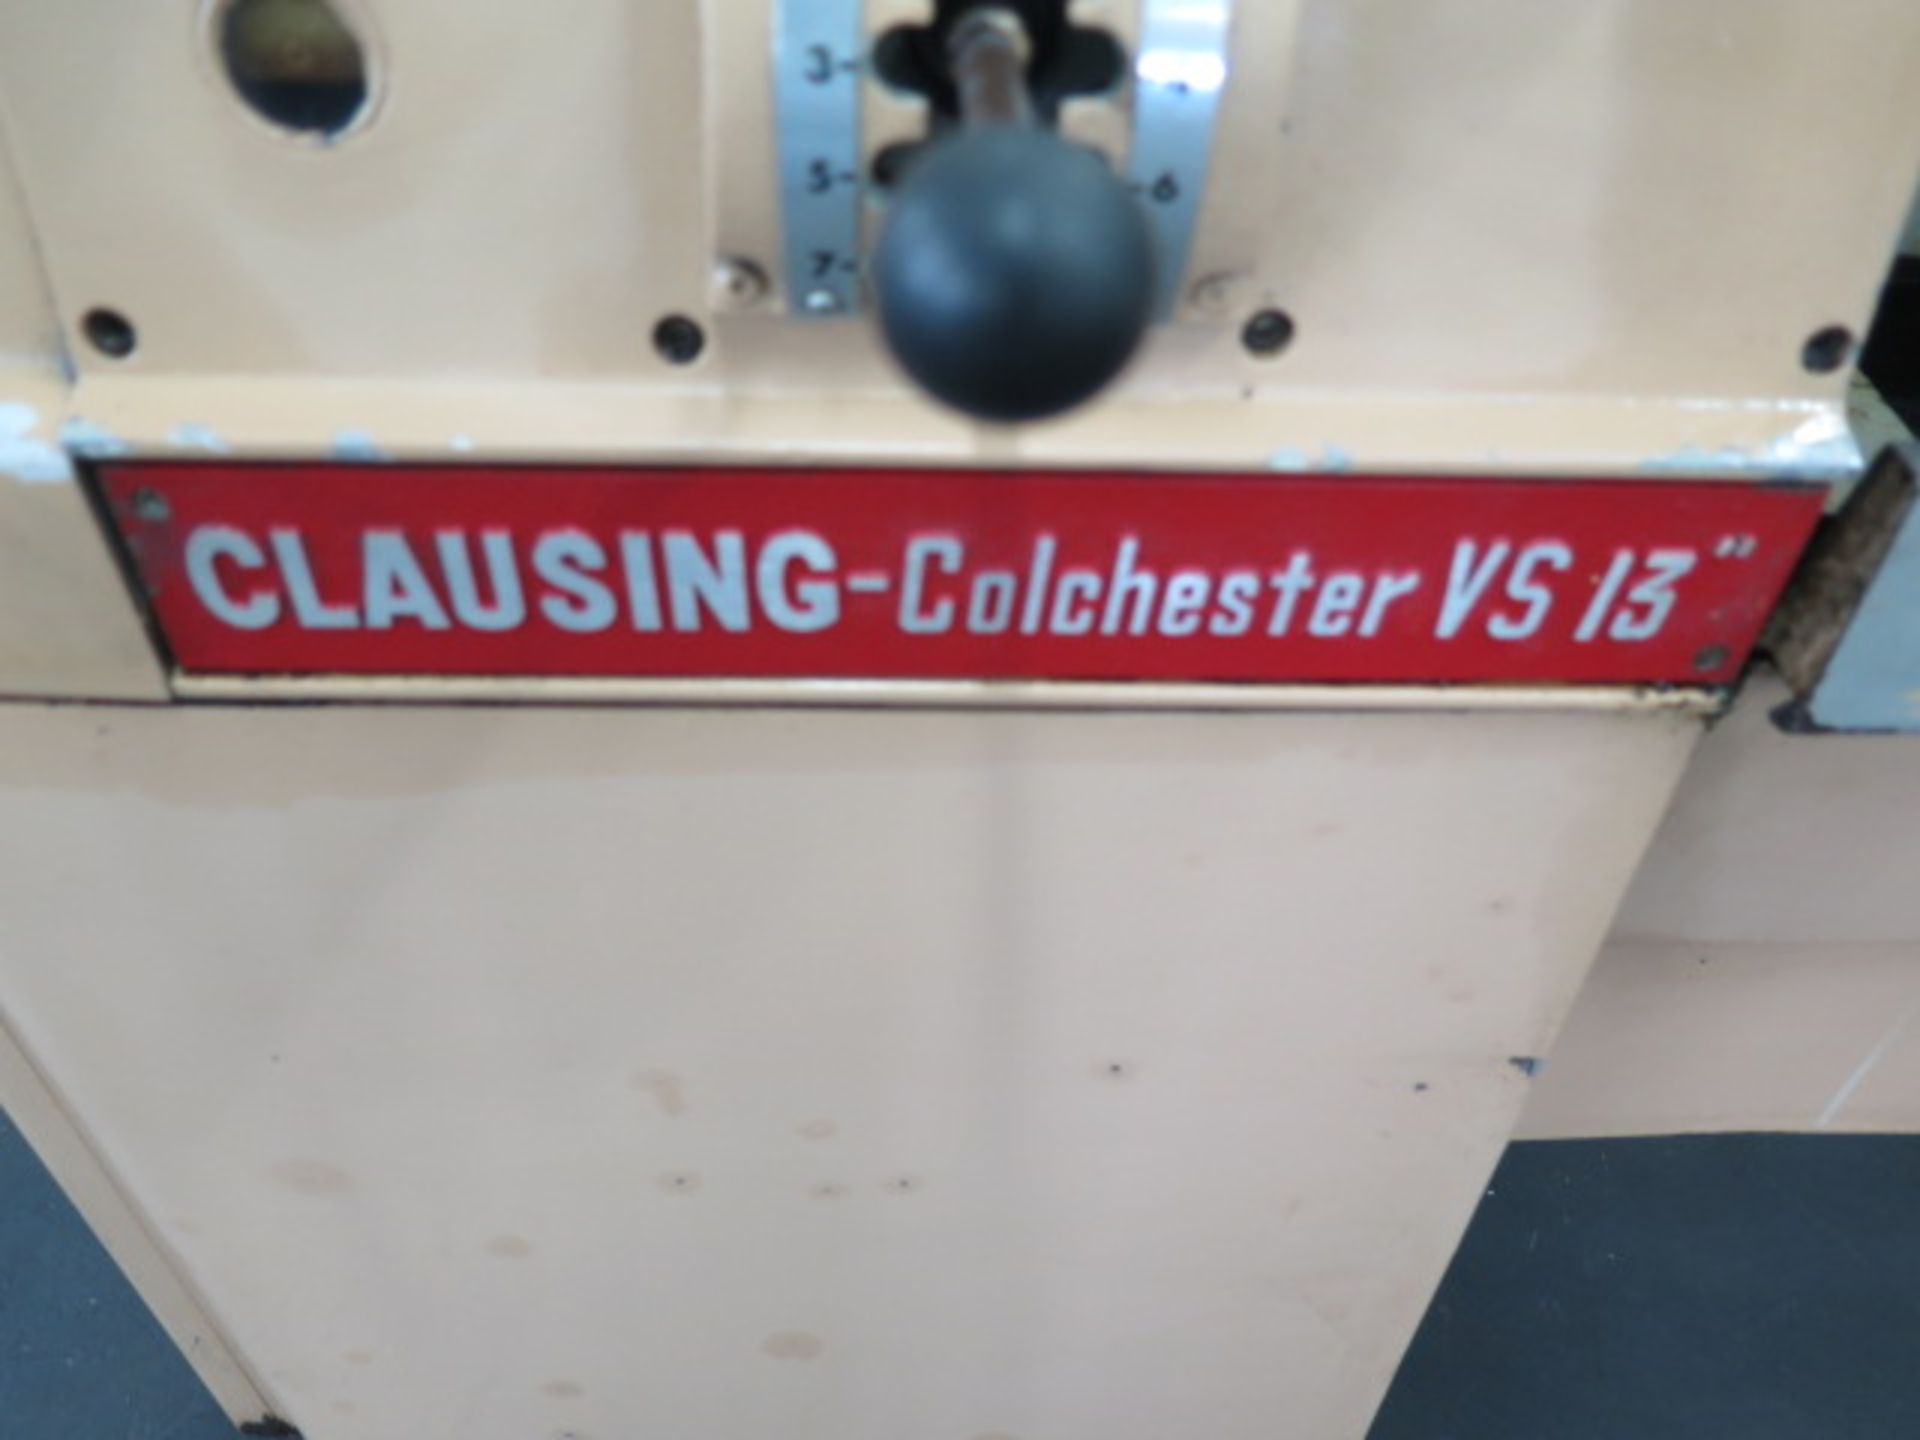 Clausing-Colchester VS-13" 13" x 42" Geared Head Lathe s/n 211/0002/00309DD w/ 21-3100 RPM, Inch/ - Image 2 of 12